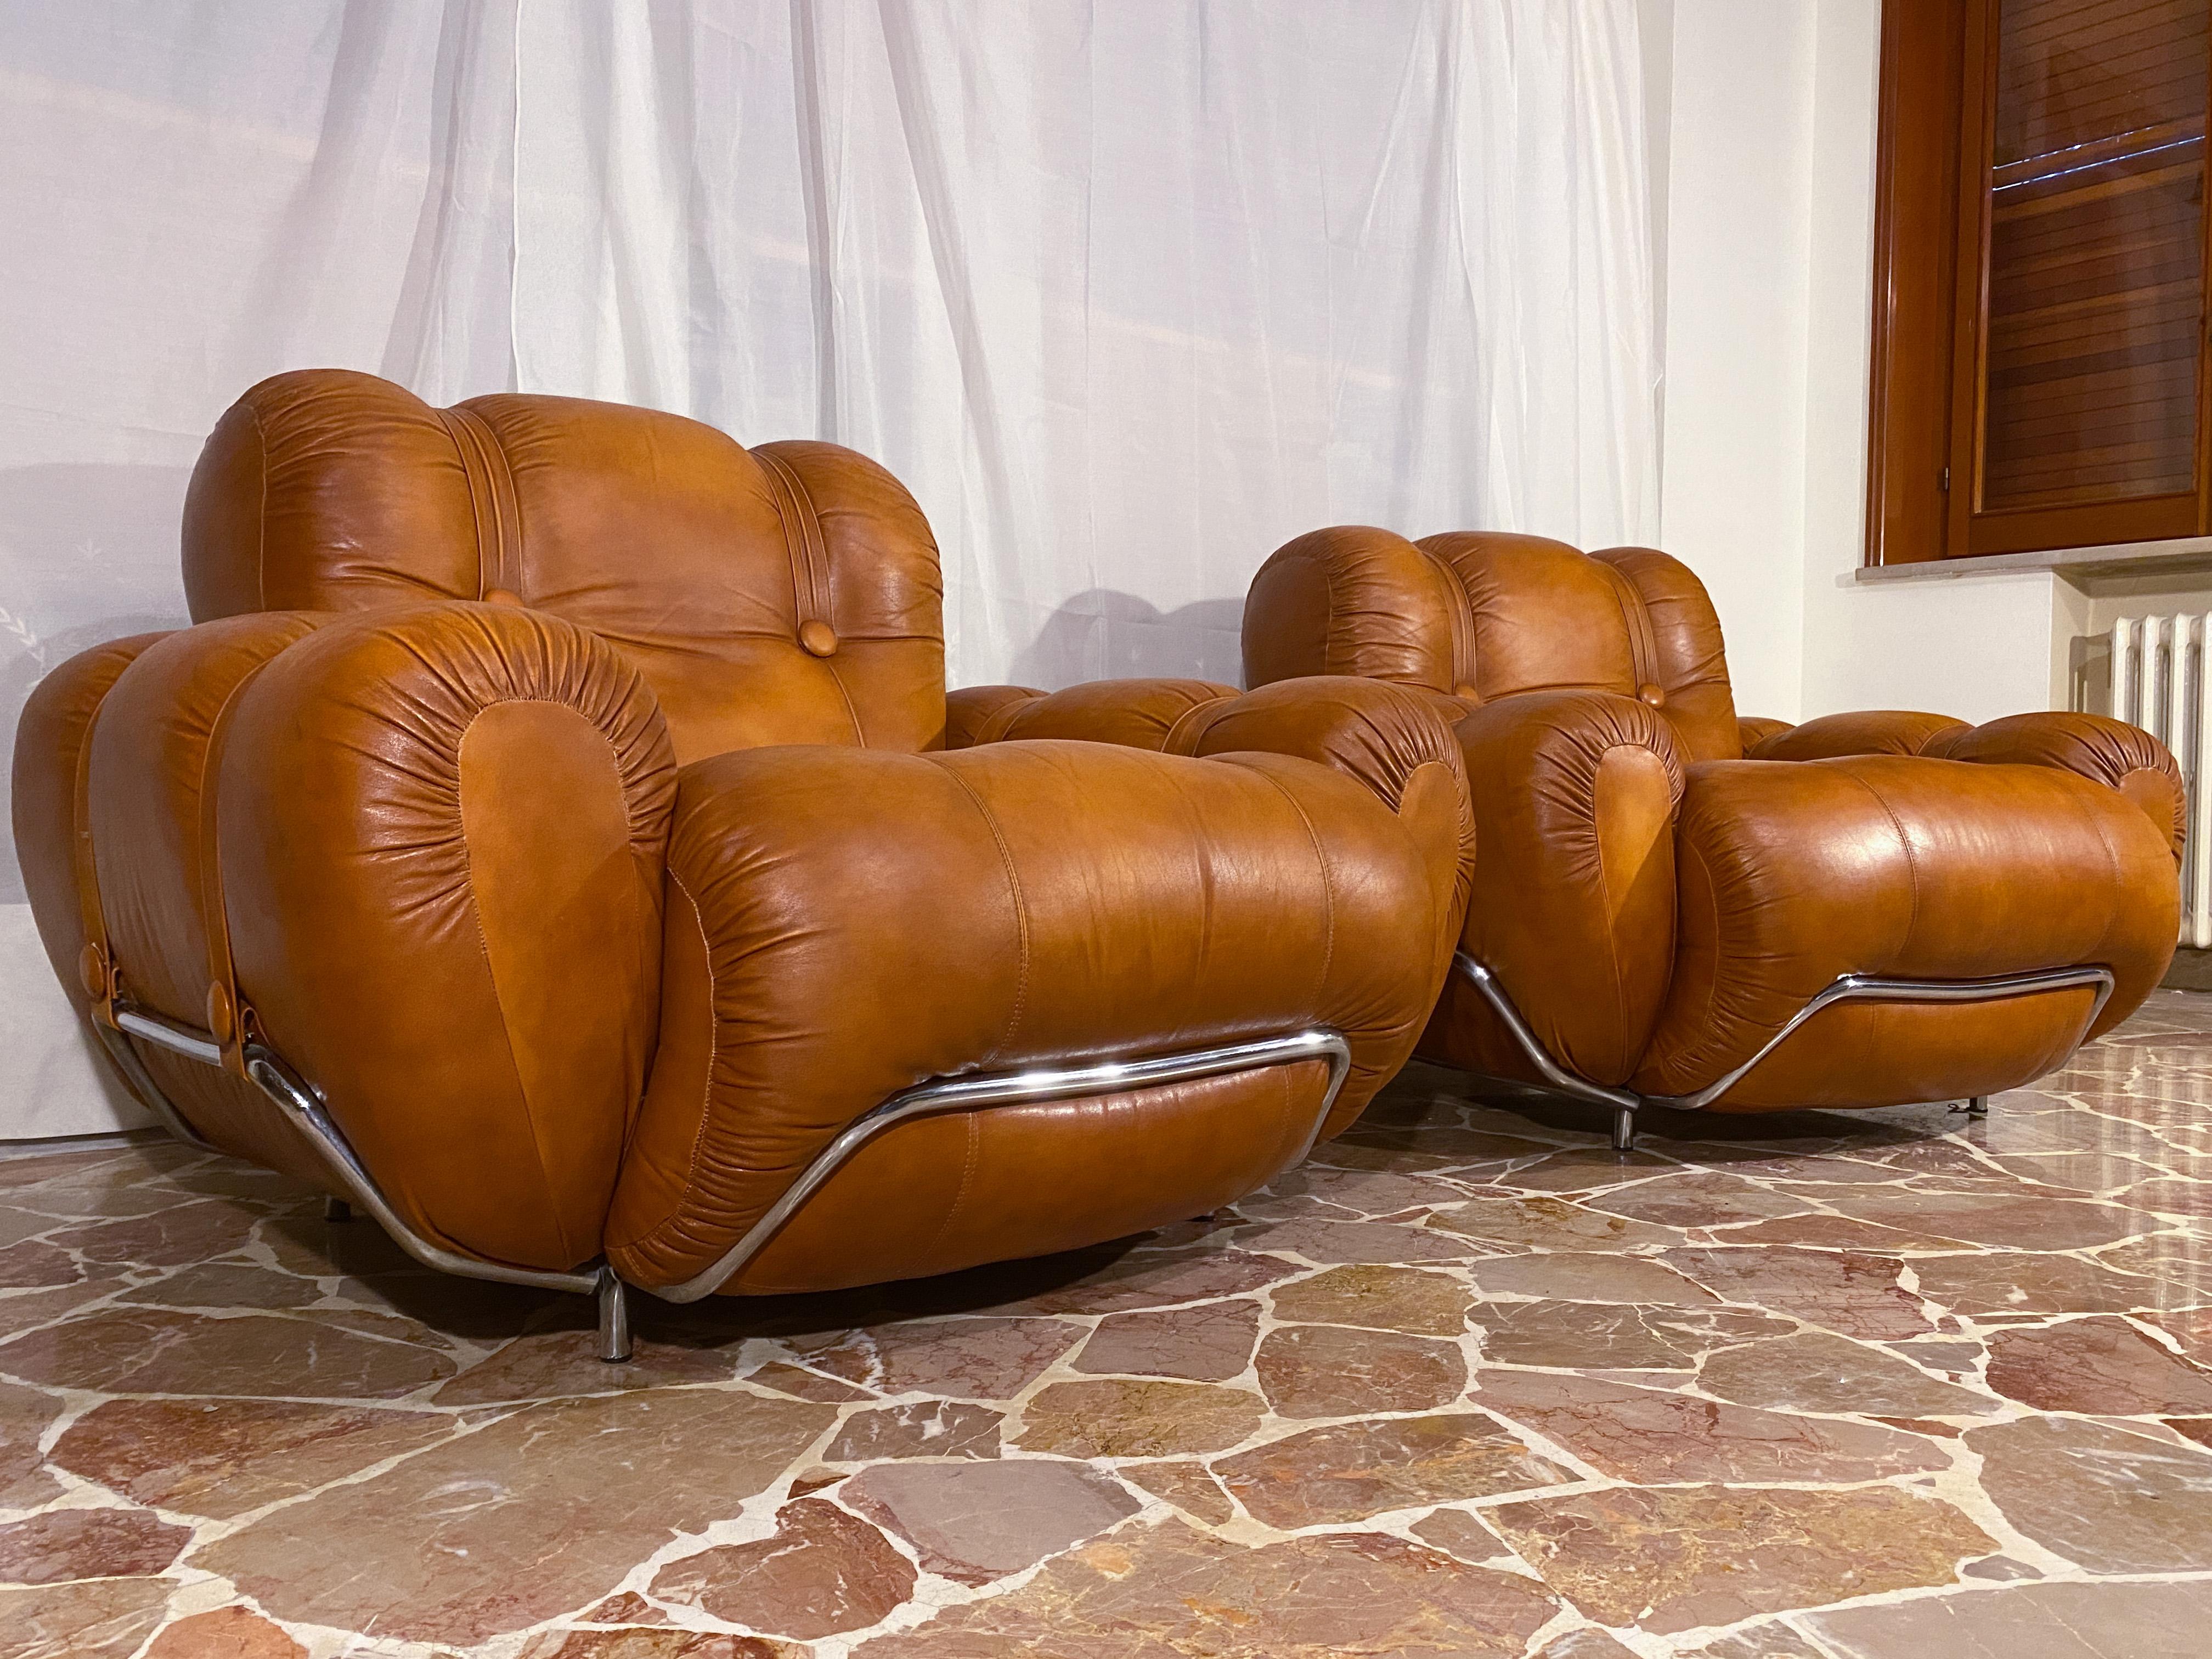 Italian Mid-Century Space Age Living Room Set in Natural Leather, 1970 In Good Condition For Sale In Traversetolo, IT